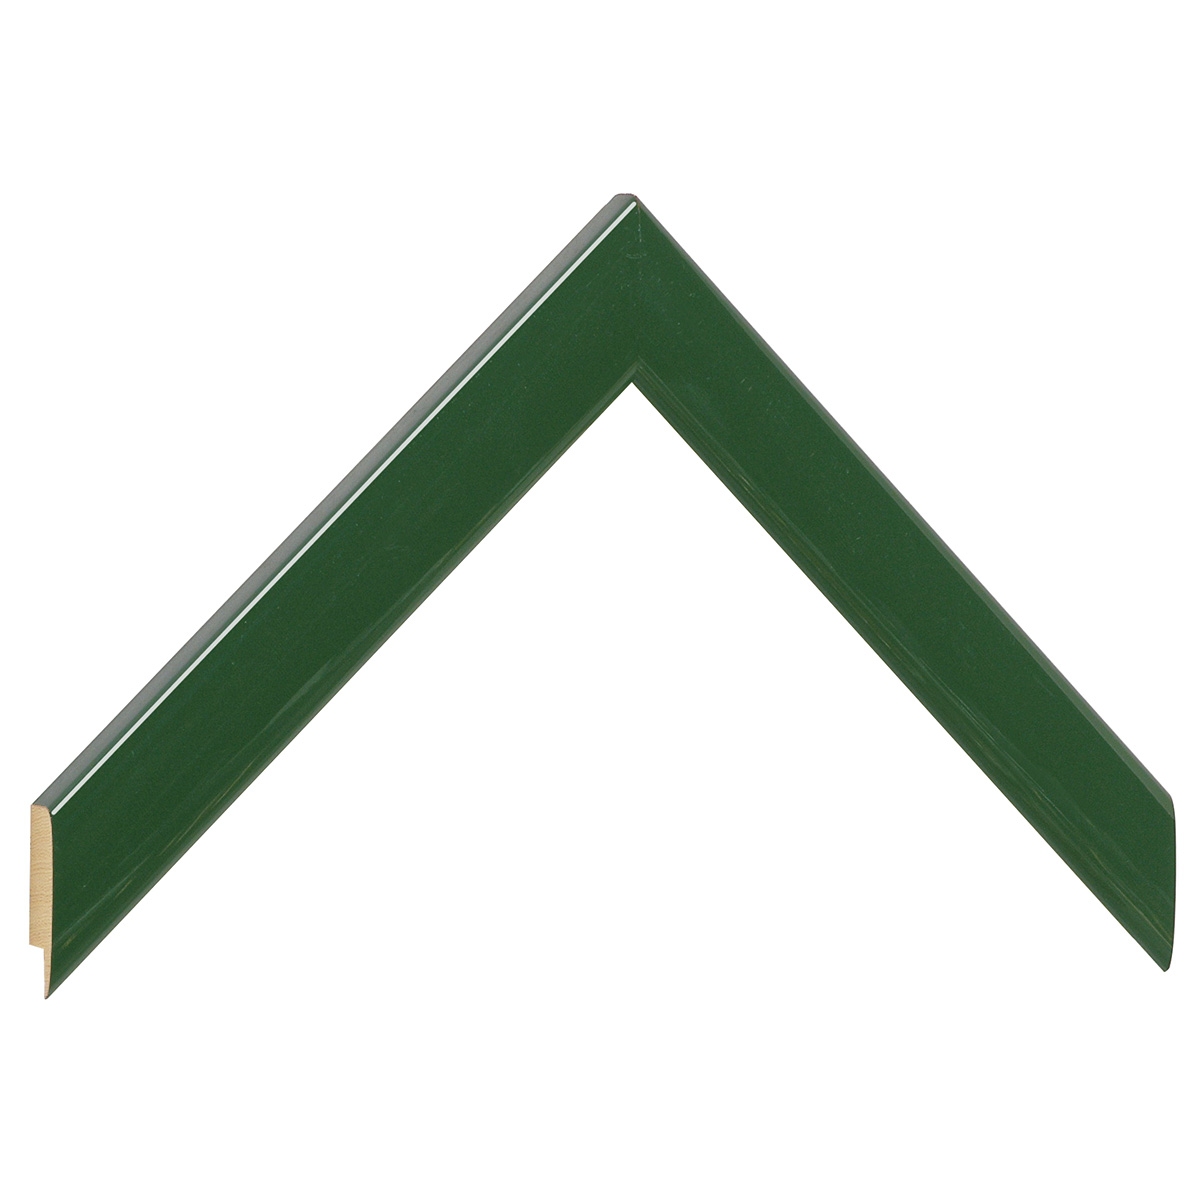 Moulding ayous, width 23mm height 13 - glossy finish, green - Sample